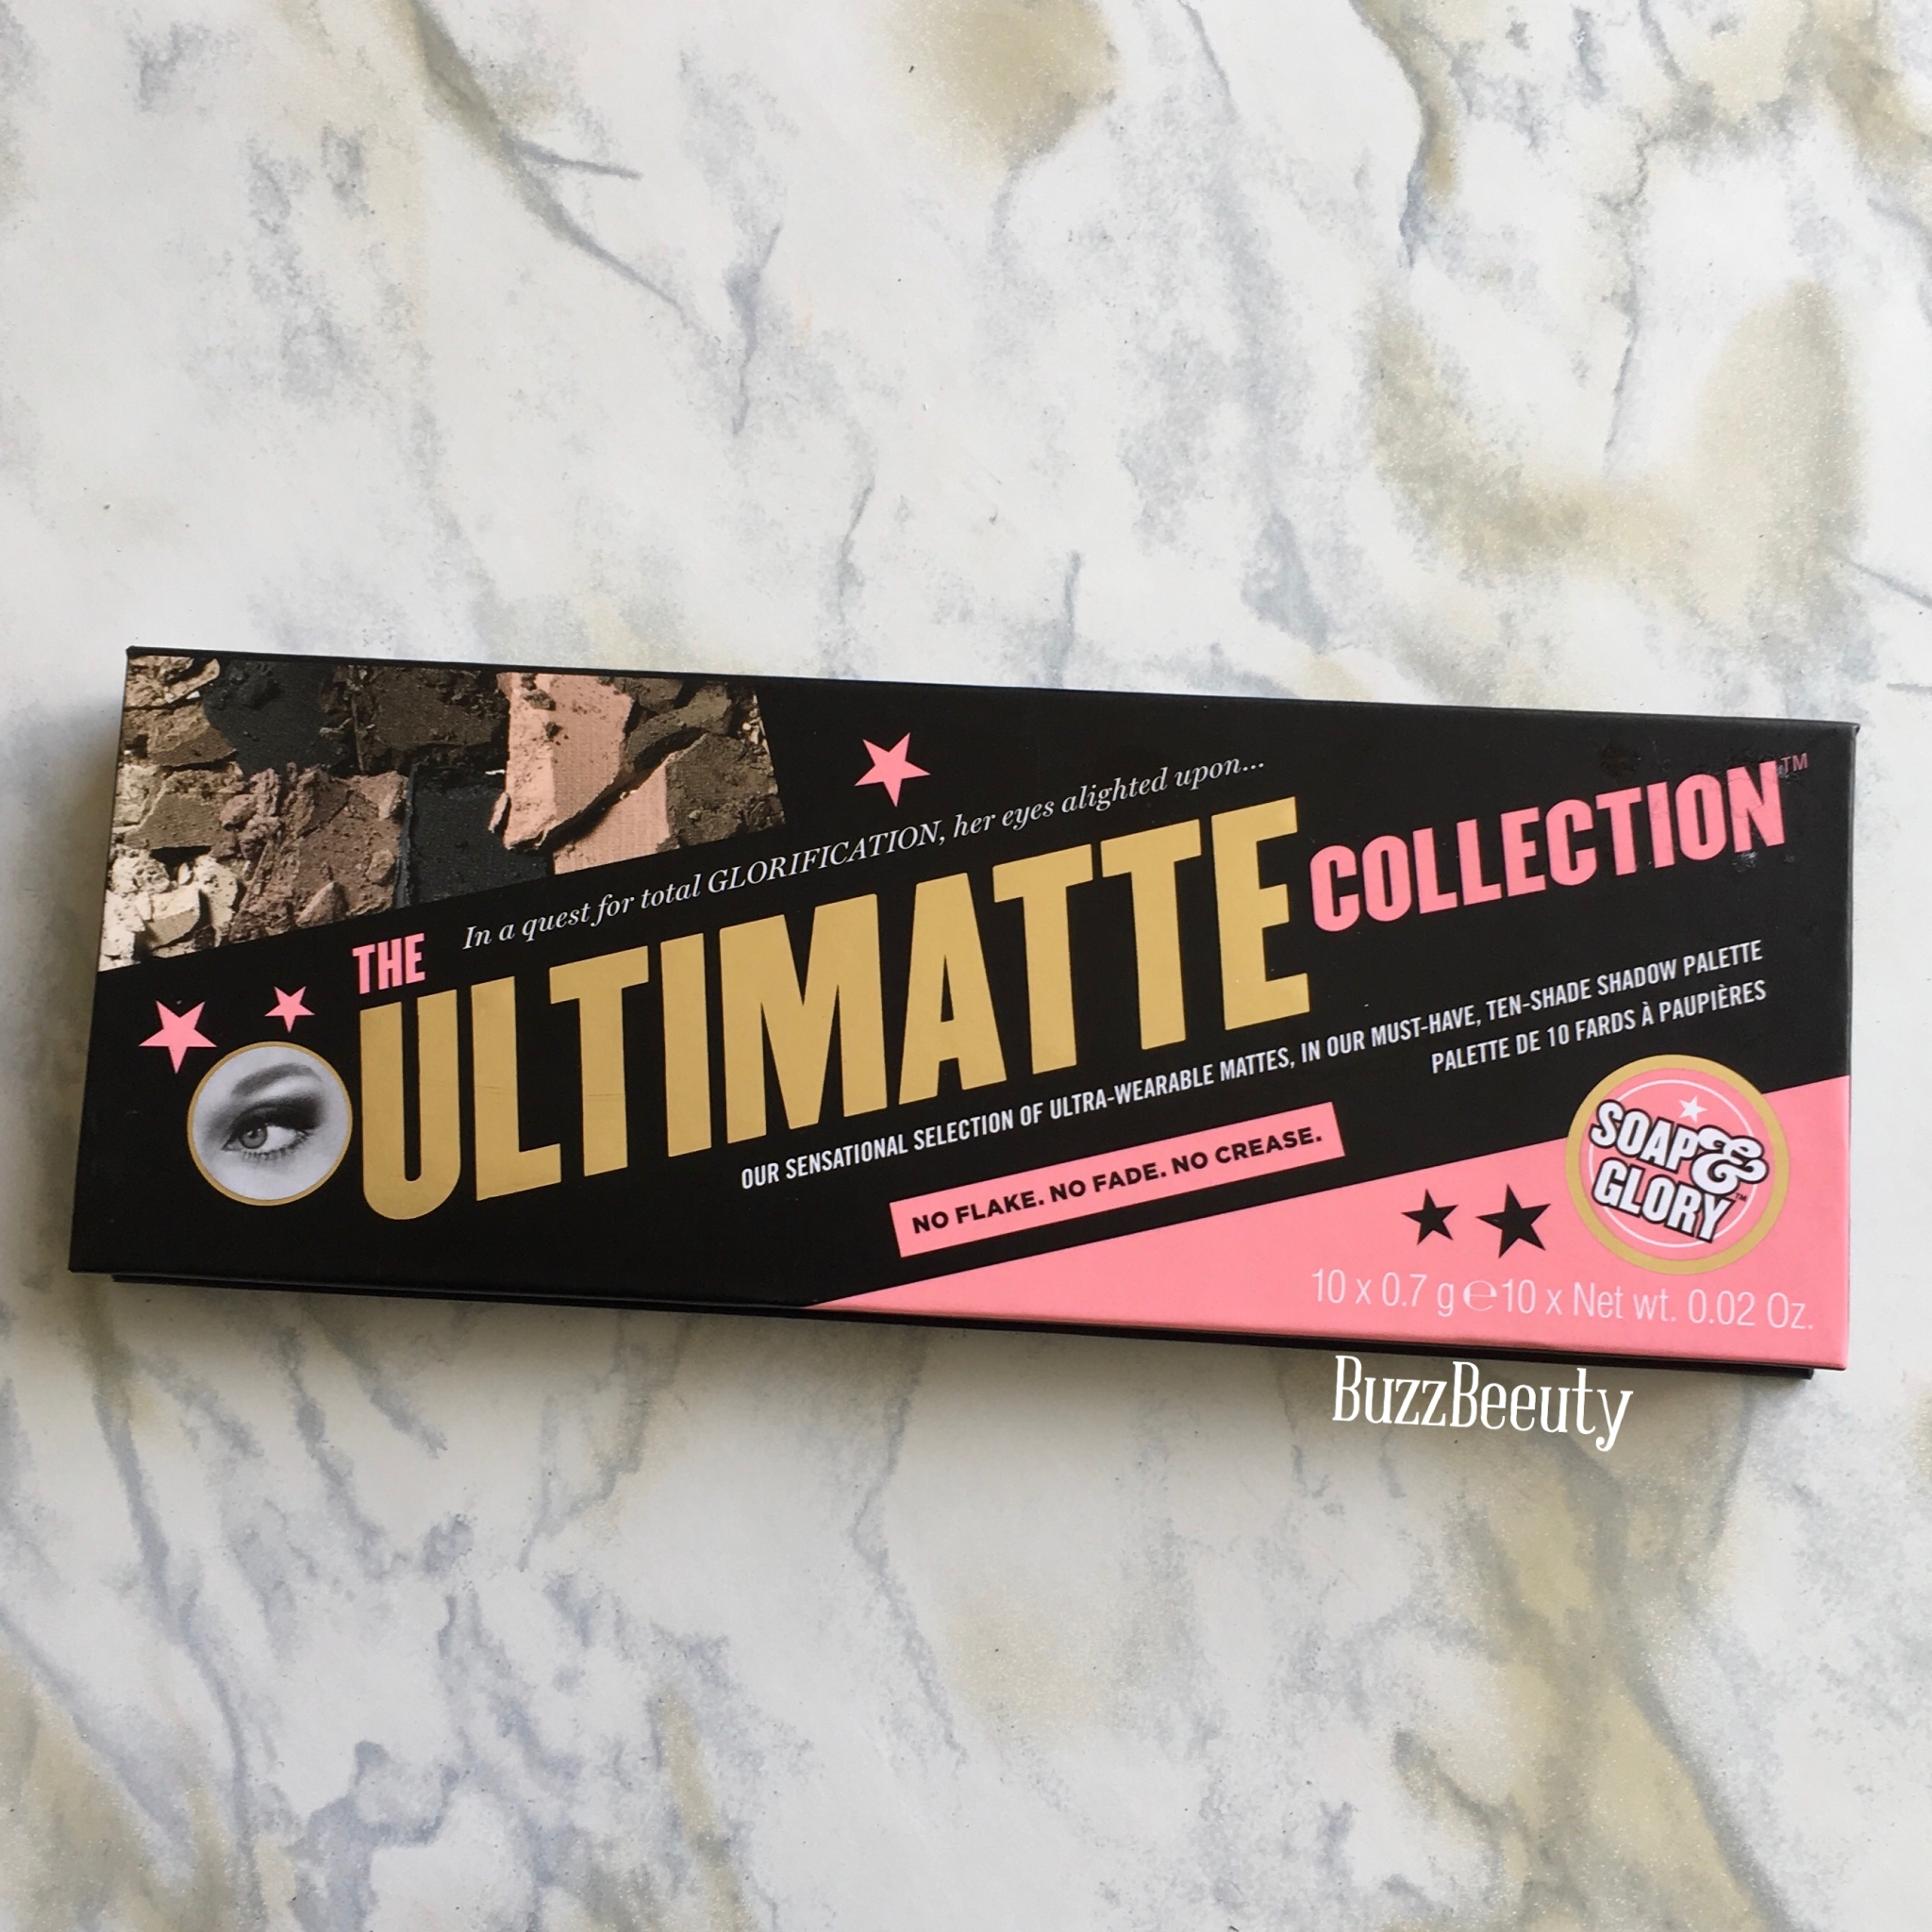 Soap & Glory The Ultimatte Collection Palette